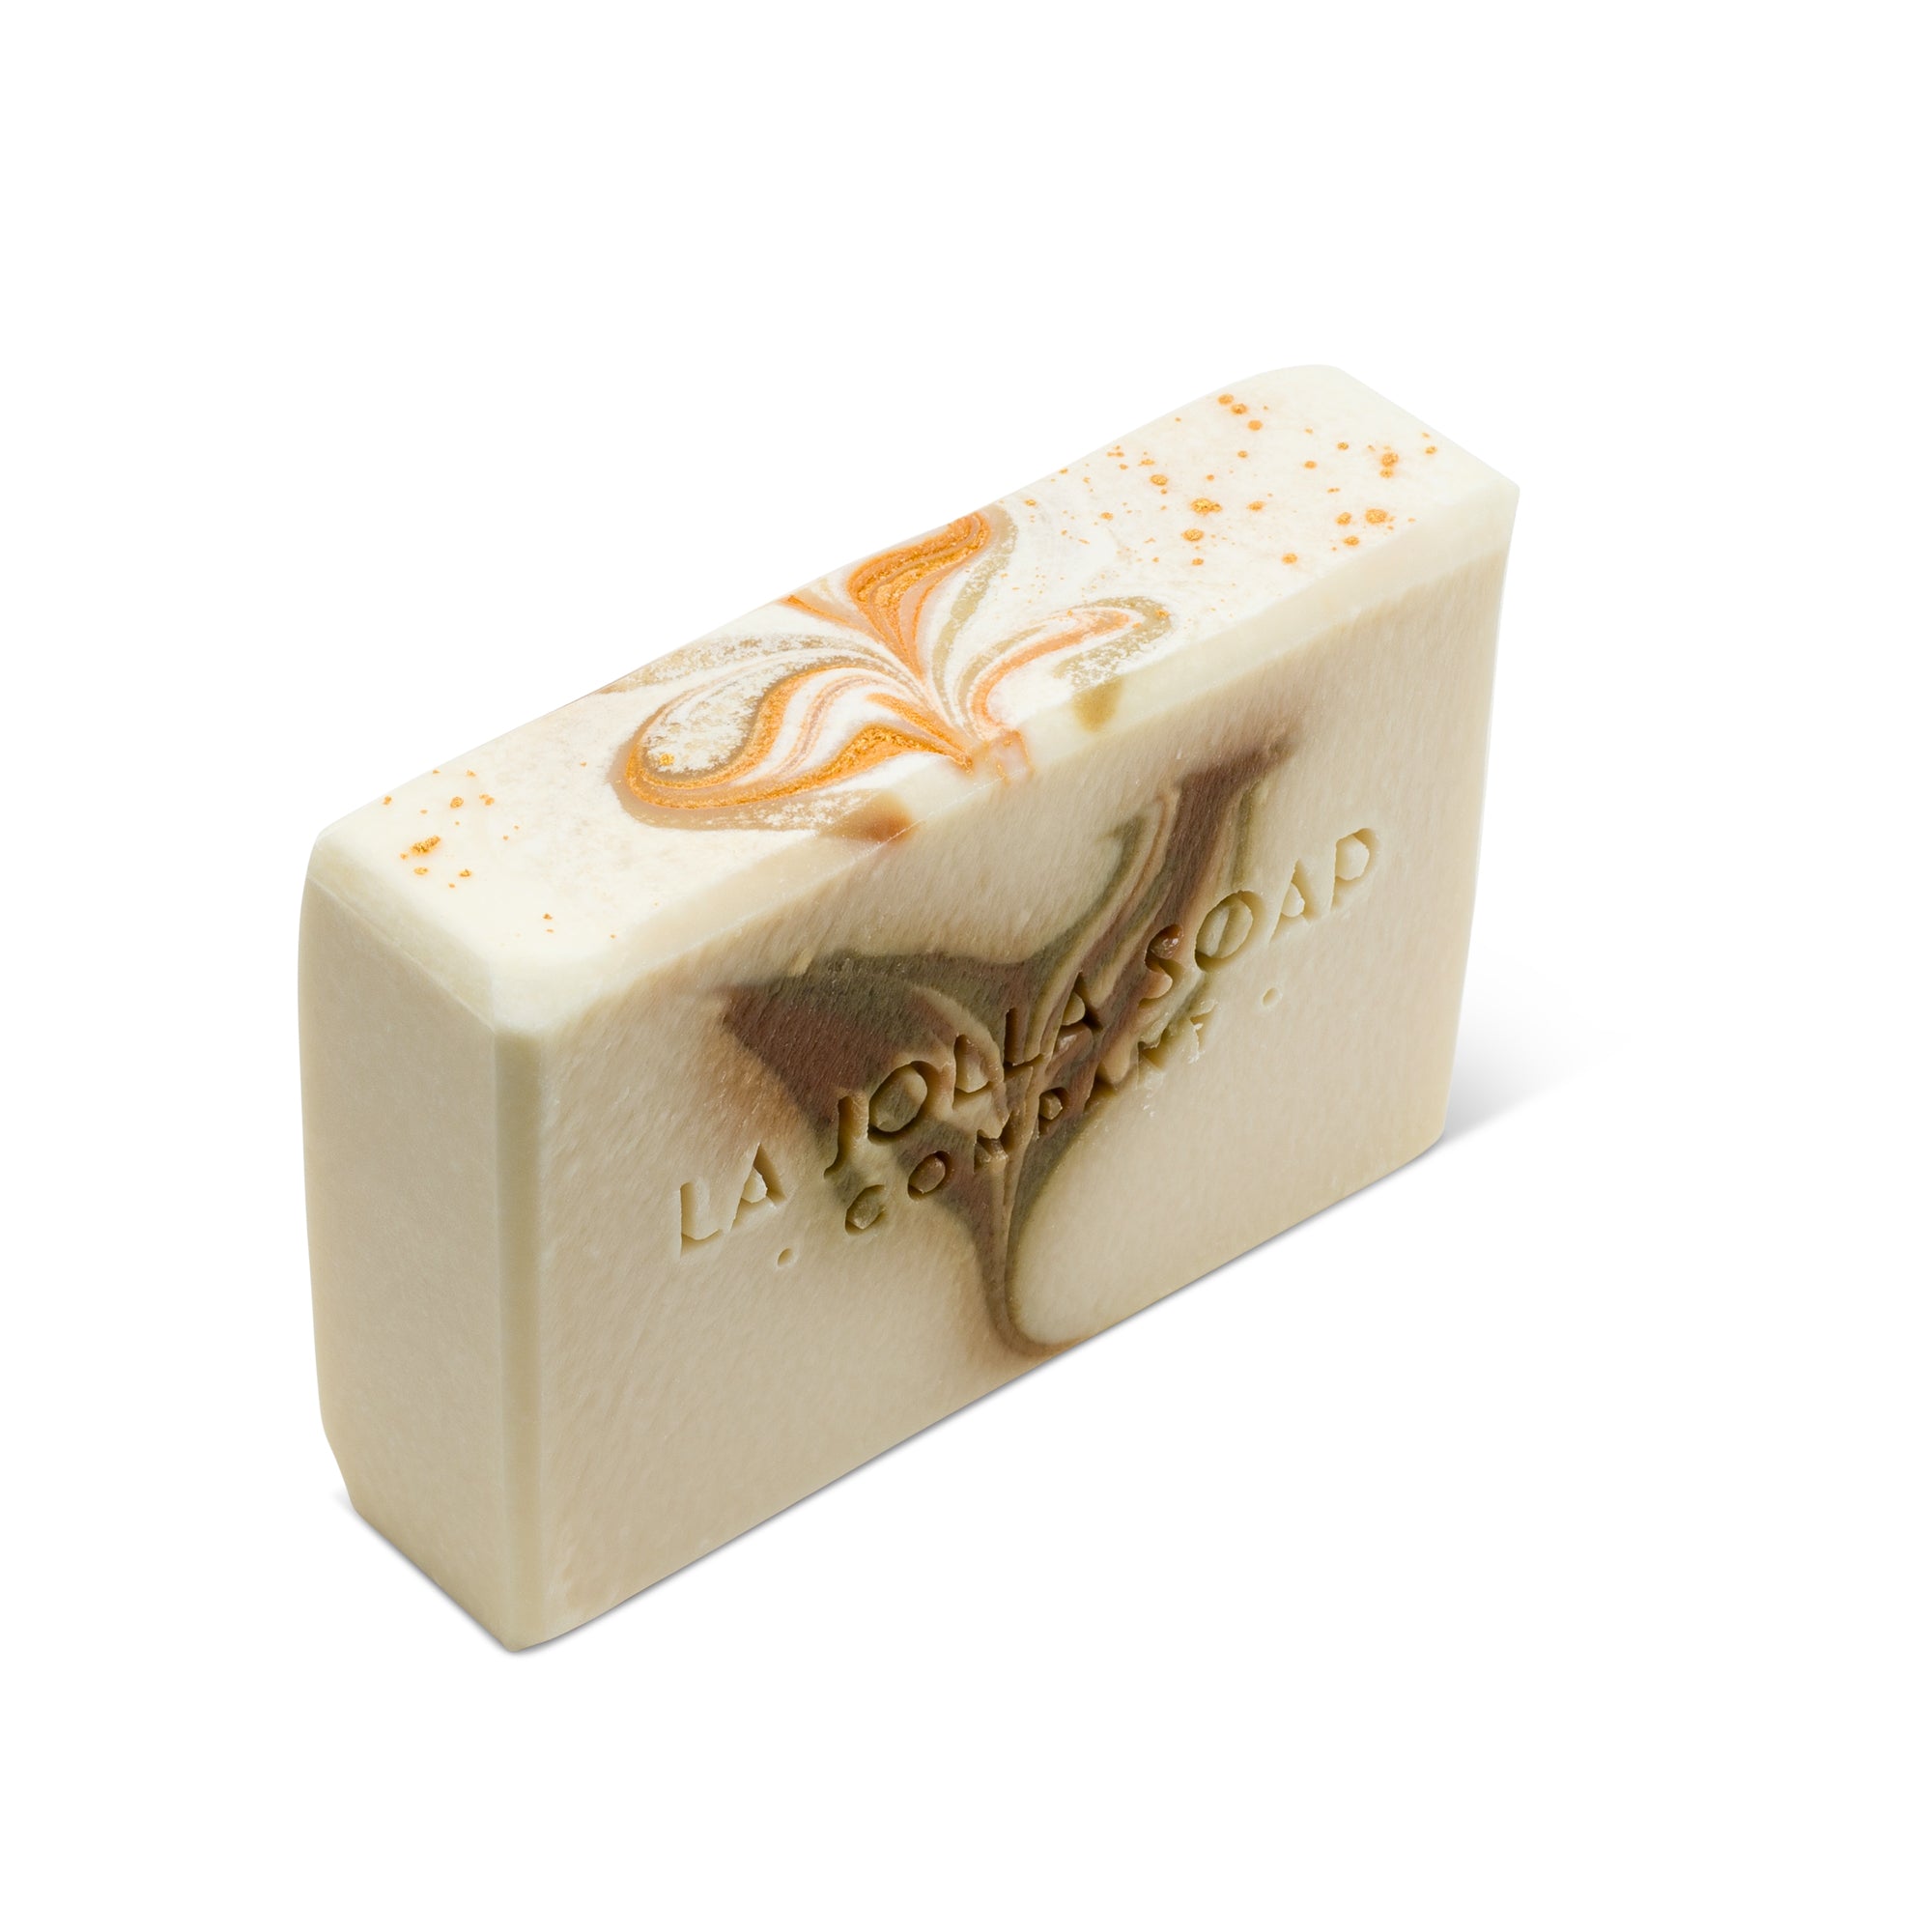 The top view of a Sea Salt soap bar White in color with brown and green swirls on the front of the bar that is shaped like a heart. La Jolla Soap Company